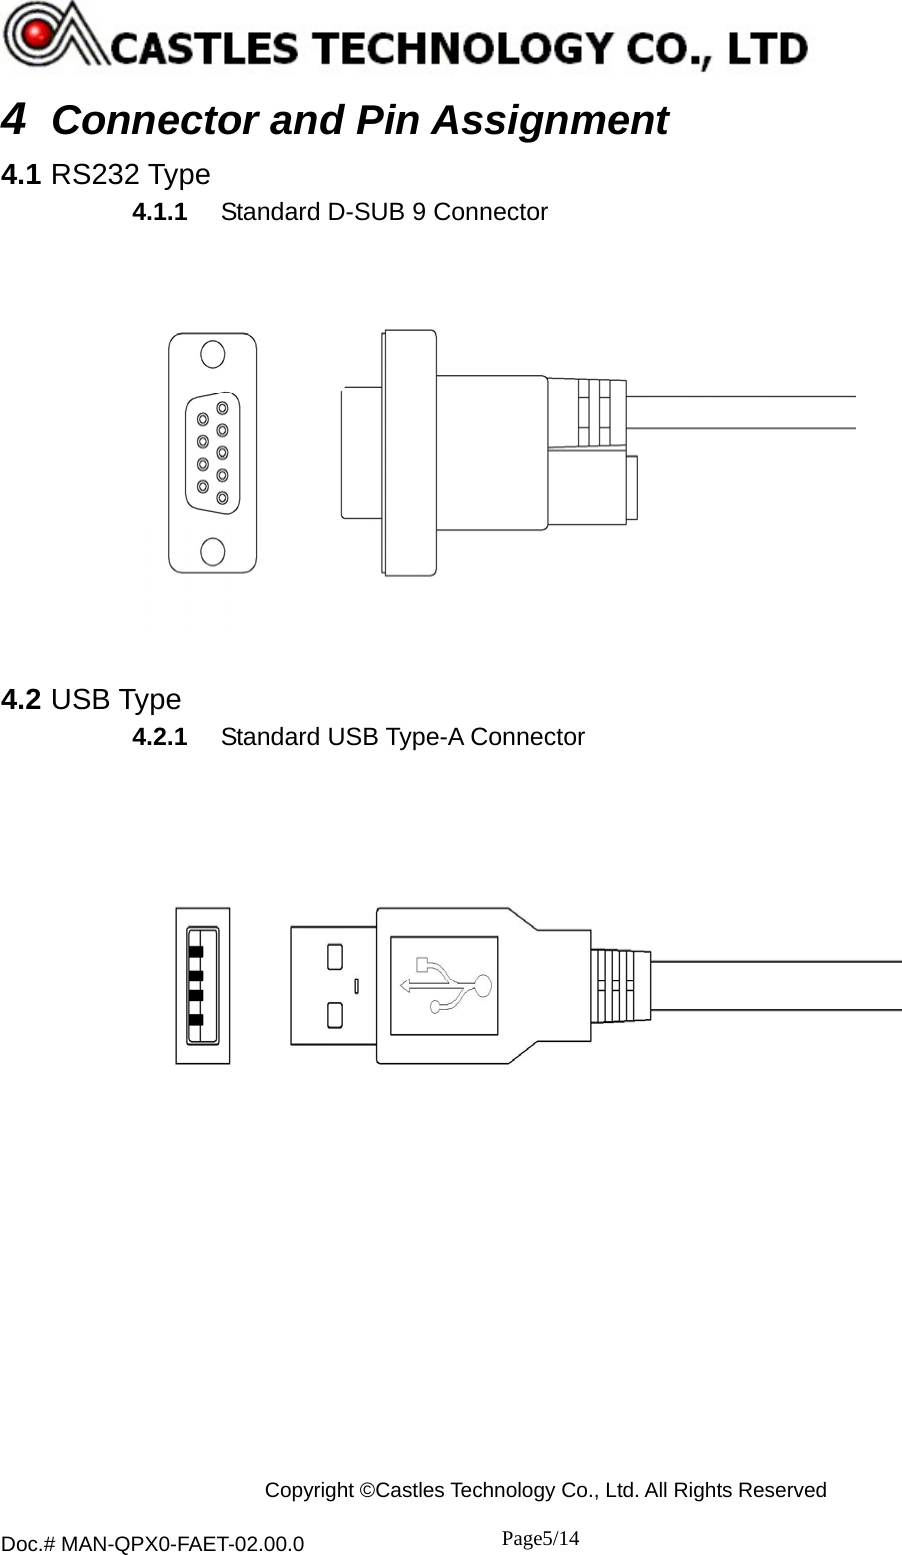  Copyright ©Castles Technology Co., Ltd. All Rights Reserved  Doc.# MAN-QPX0-FAET-02.00.0               Page5/14    4  Connector and Pin Assignment 4.1 RS232 Type 4.1.1  Standard D-SUB 9 Connector    4.2 USB Type 4.2.1  Standard USB Type-A Connector           